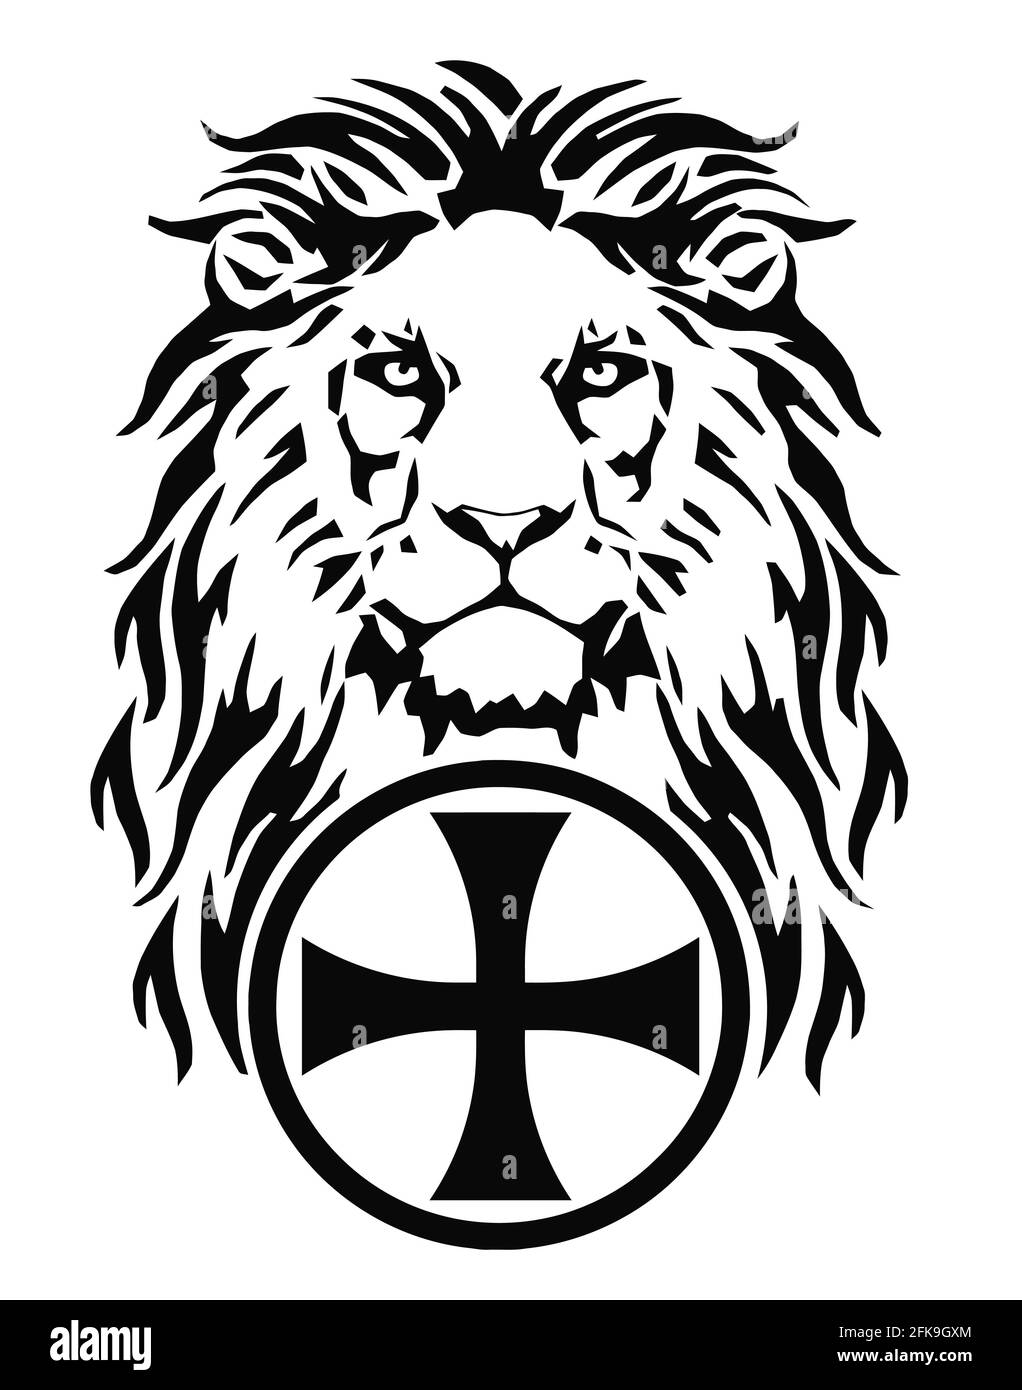 The Lion's head and the symbol of Christianity - the catholic cross, drawing for tattoo, on a white background, illustration, black and white Stock Photo